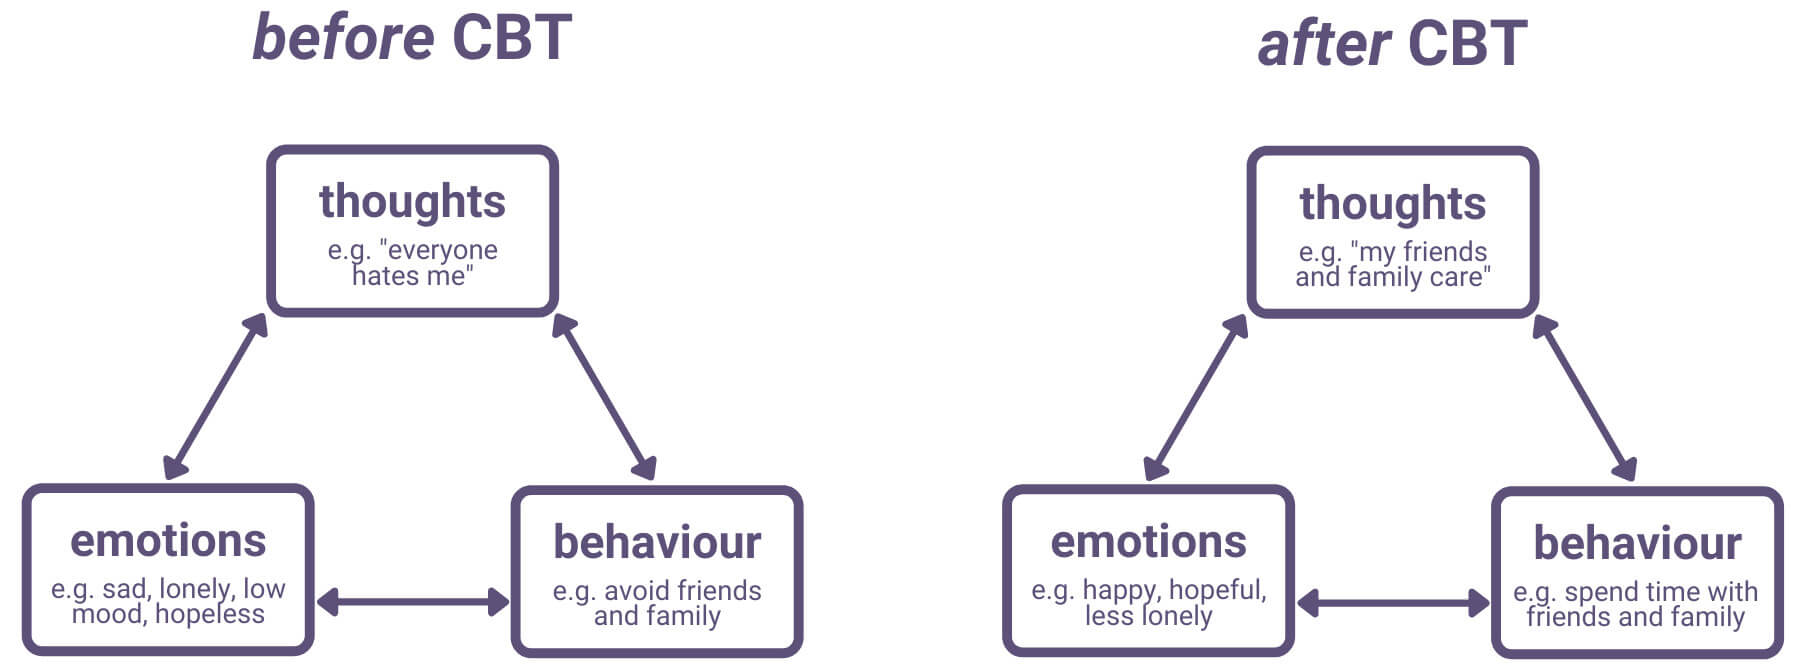 cognitive behavioural therapy for depression before and after